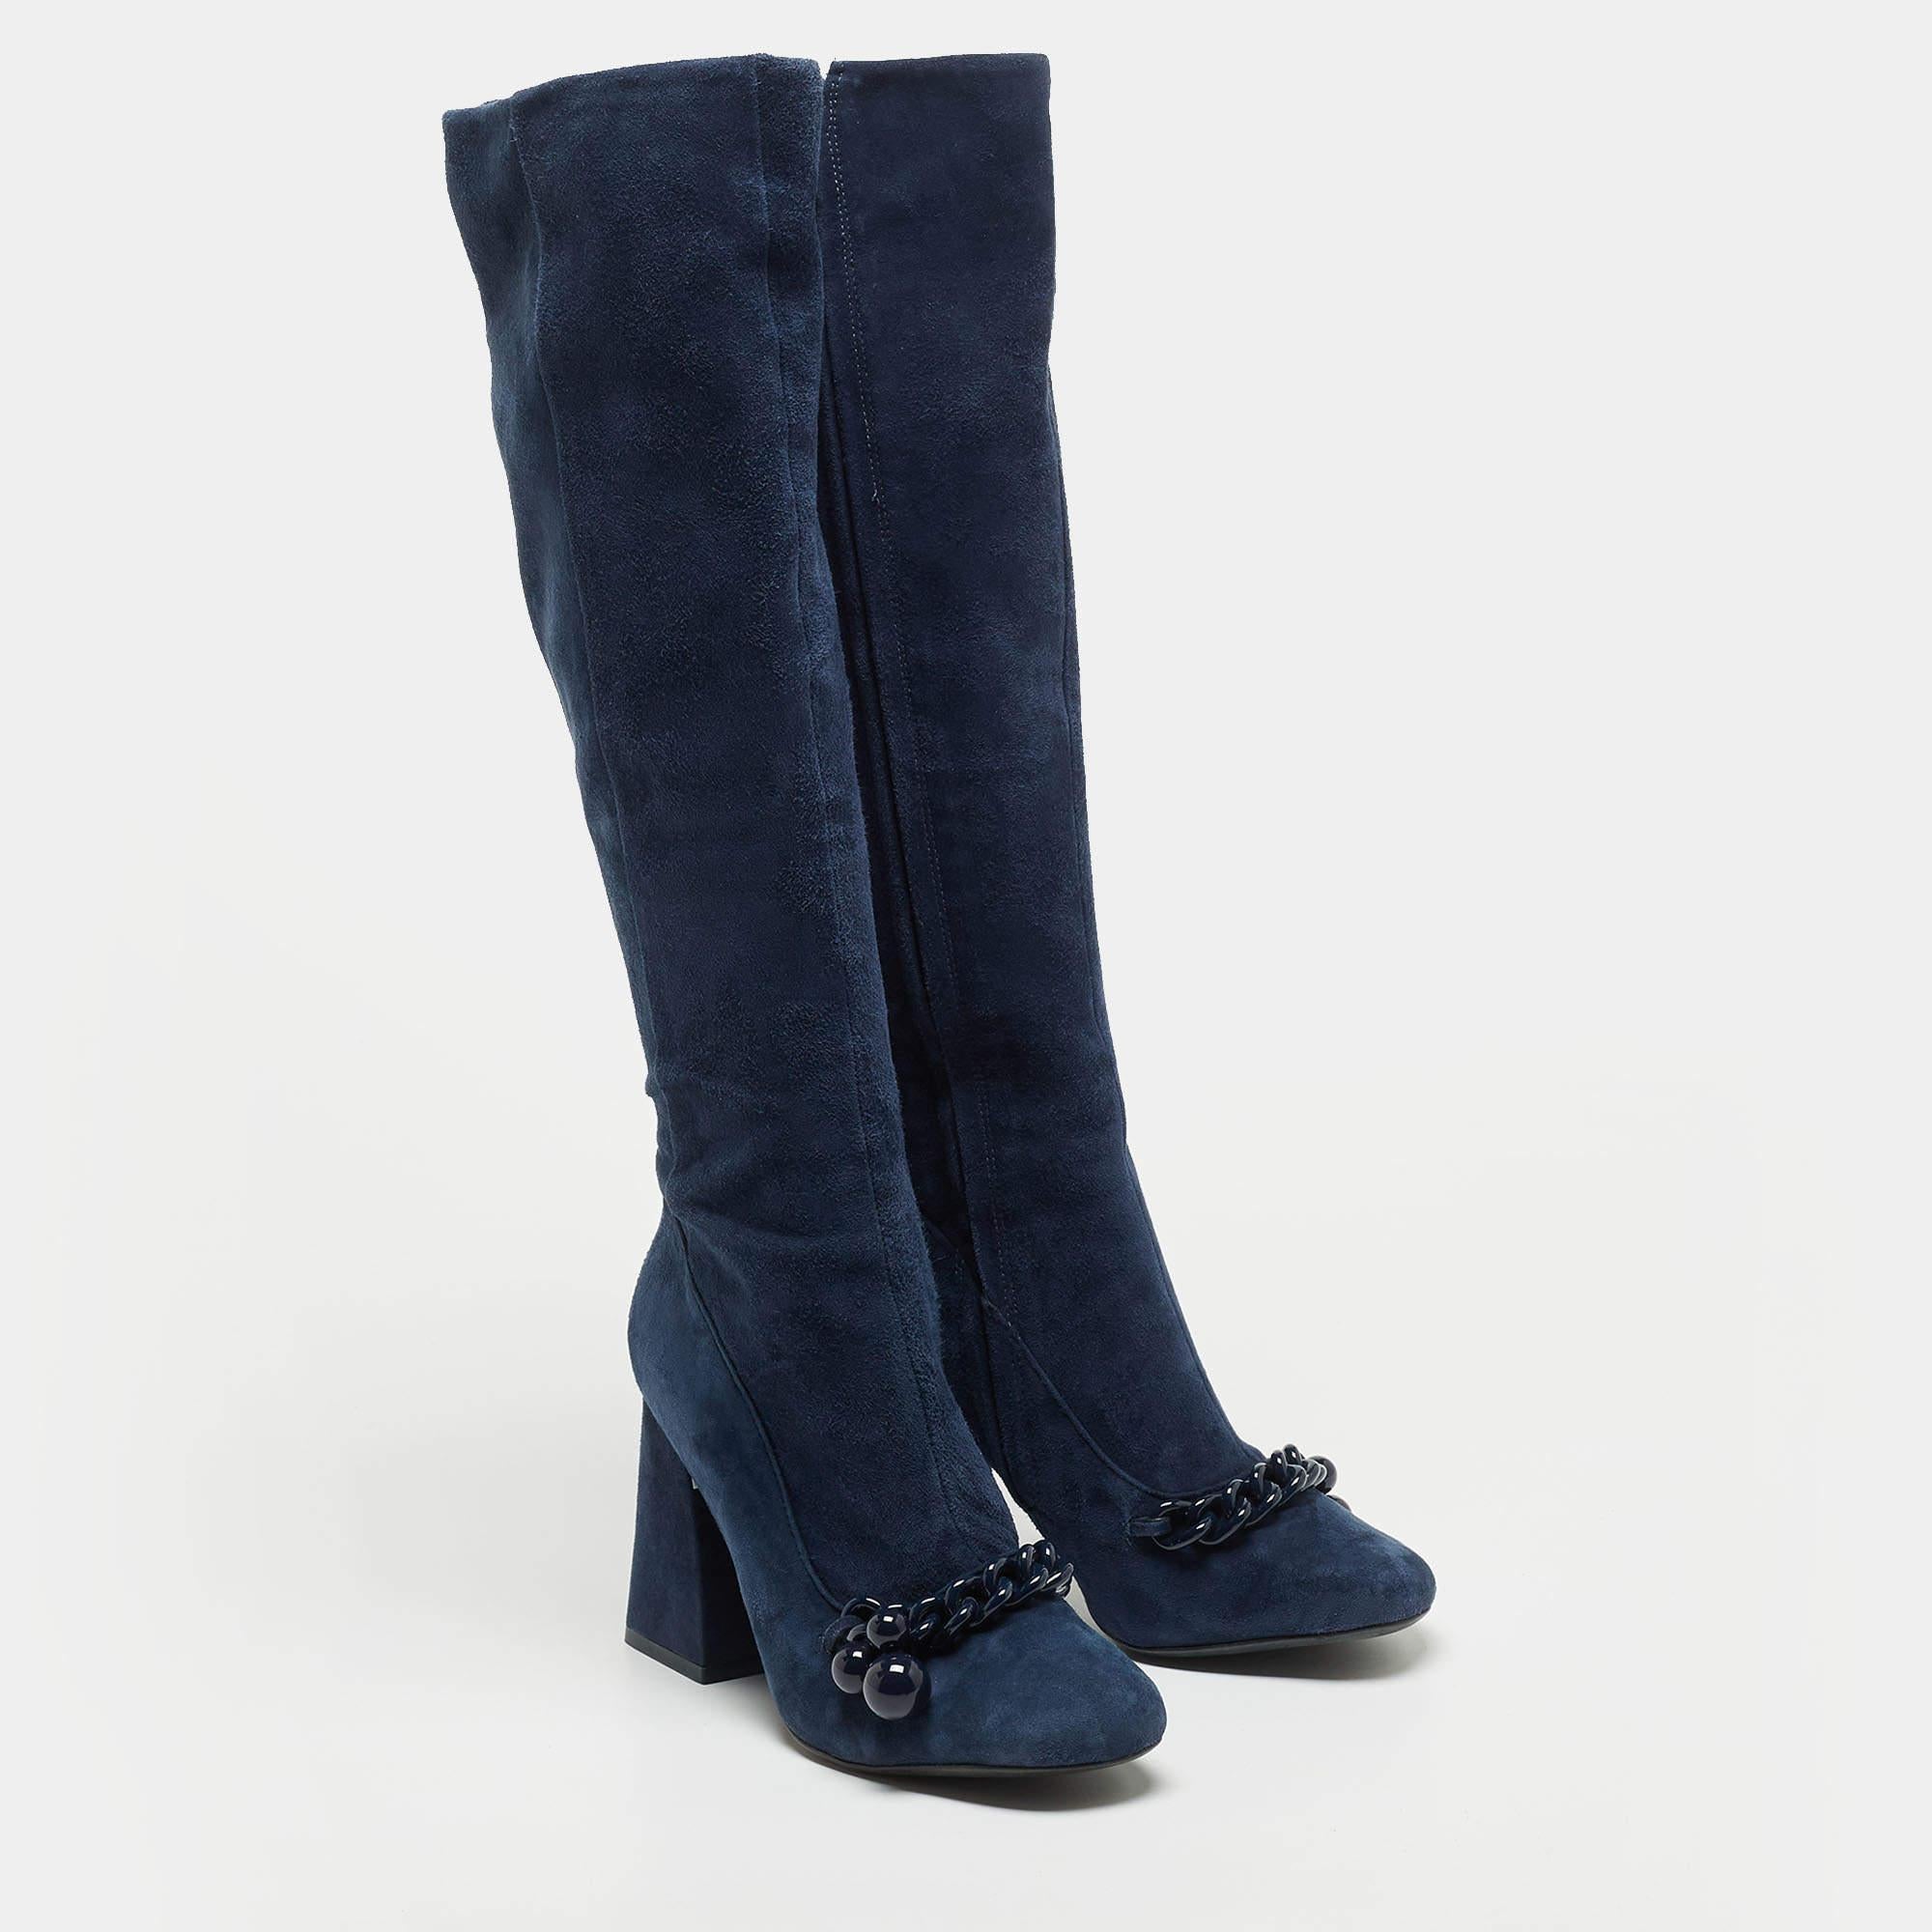 Black Tory Burch Navy Blue Suede Knee Length Boots Size 37